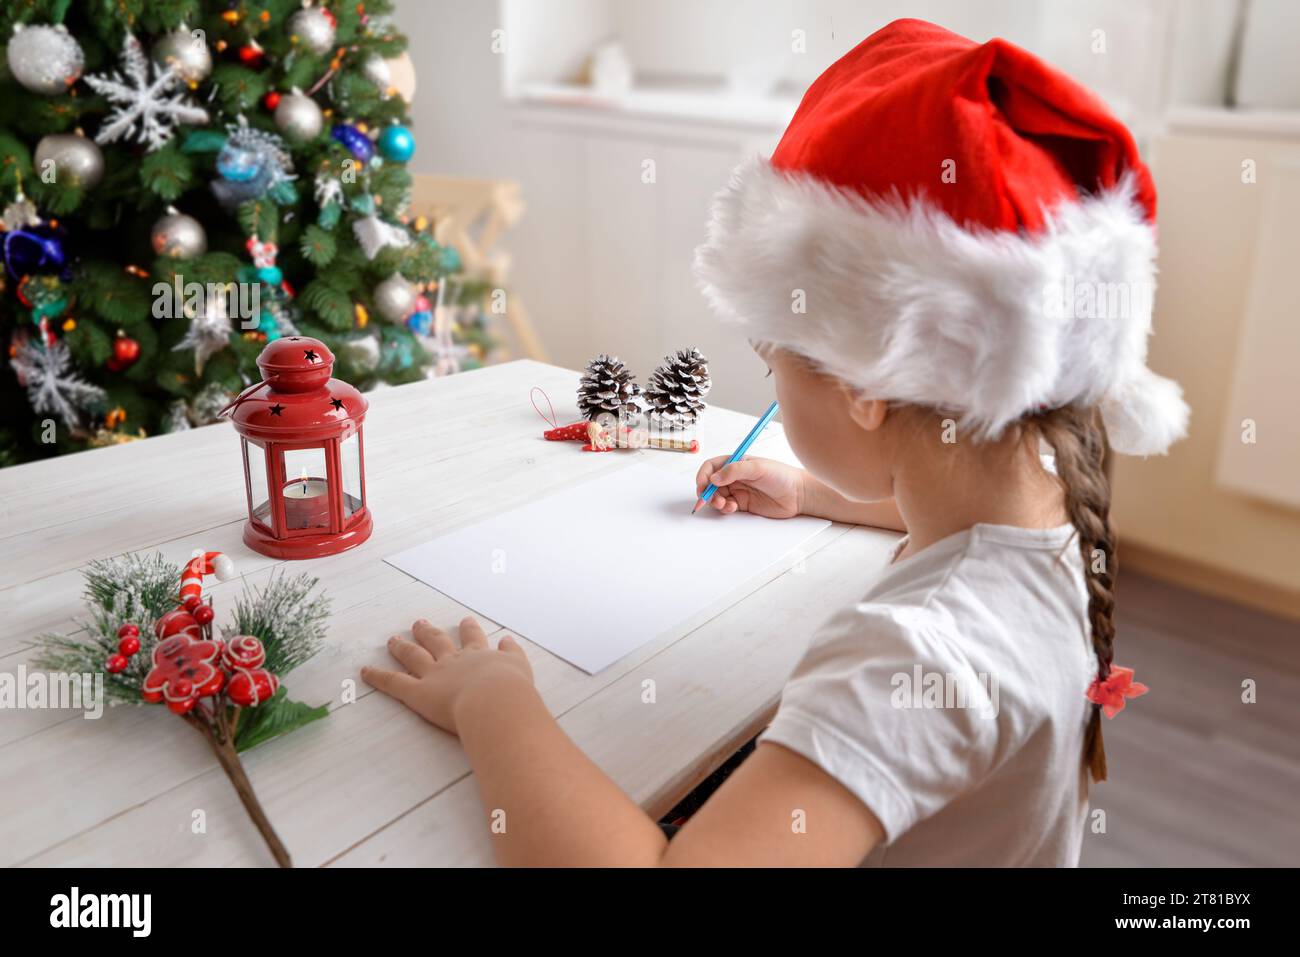 Girl writes letter to Santa Claus at home with Christmas hat. Tree and festive decorations in background. Heartwarming holiday scene Stock Photo